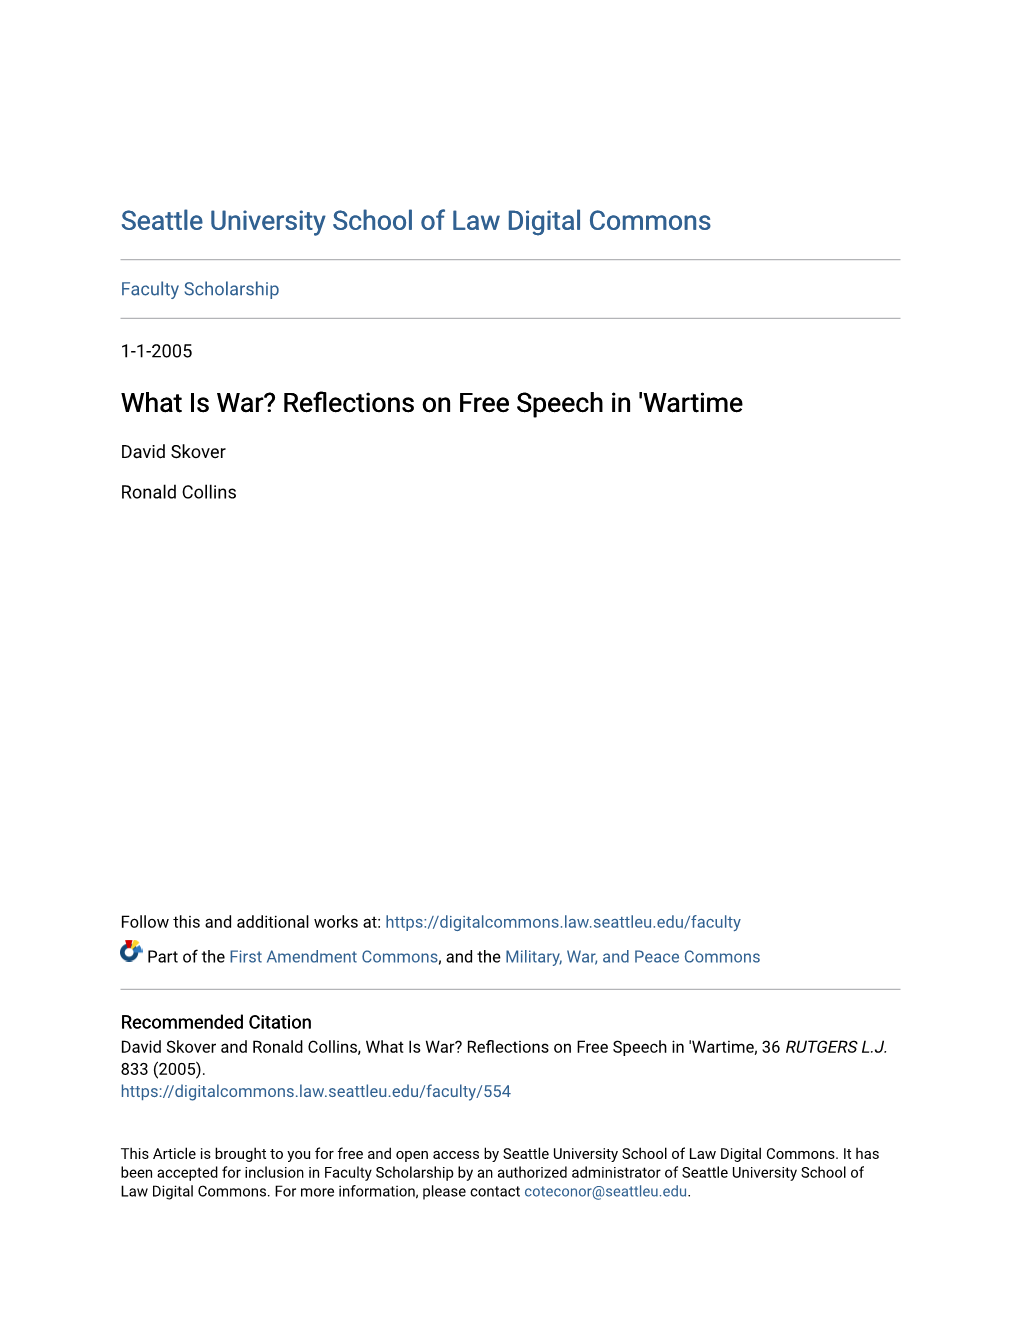 What Is War? Reflections on Free Speech in 'Wartime